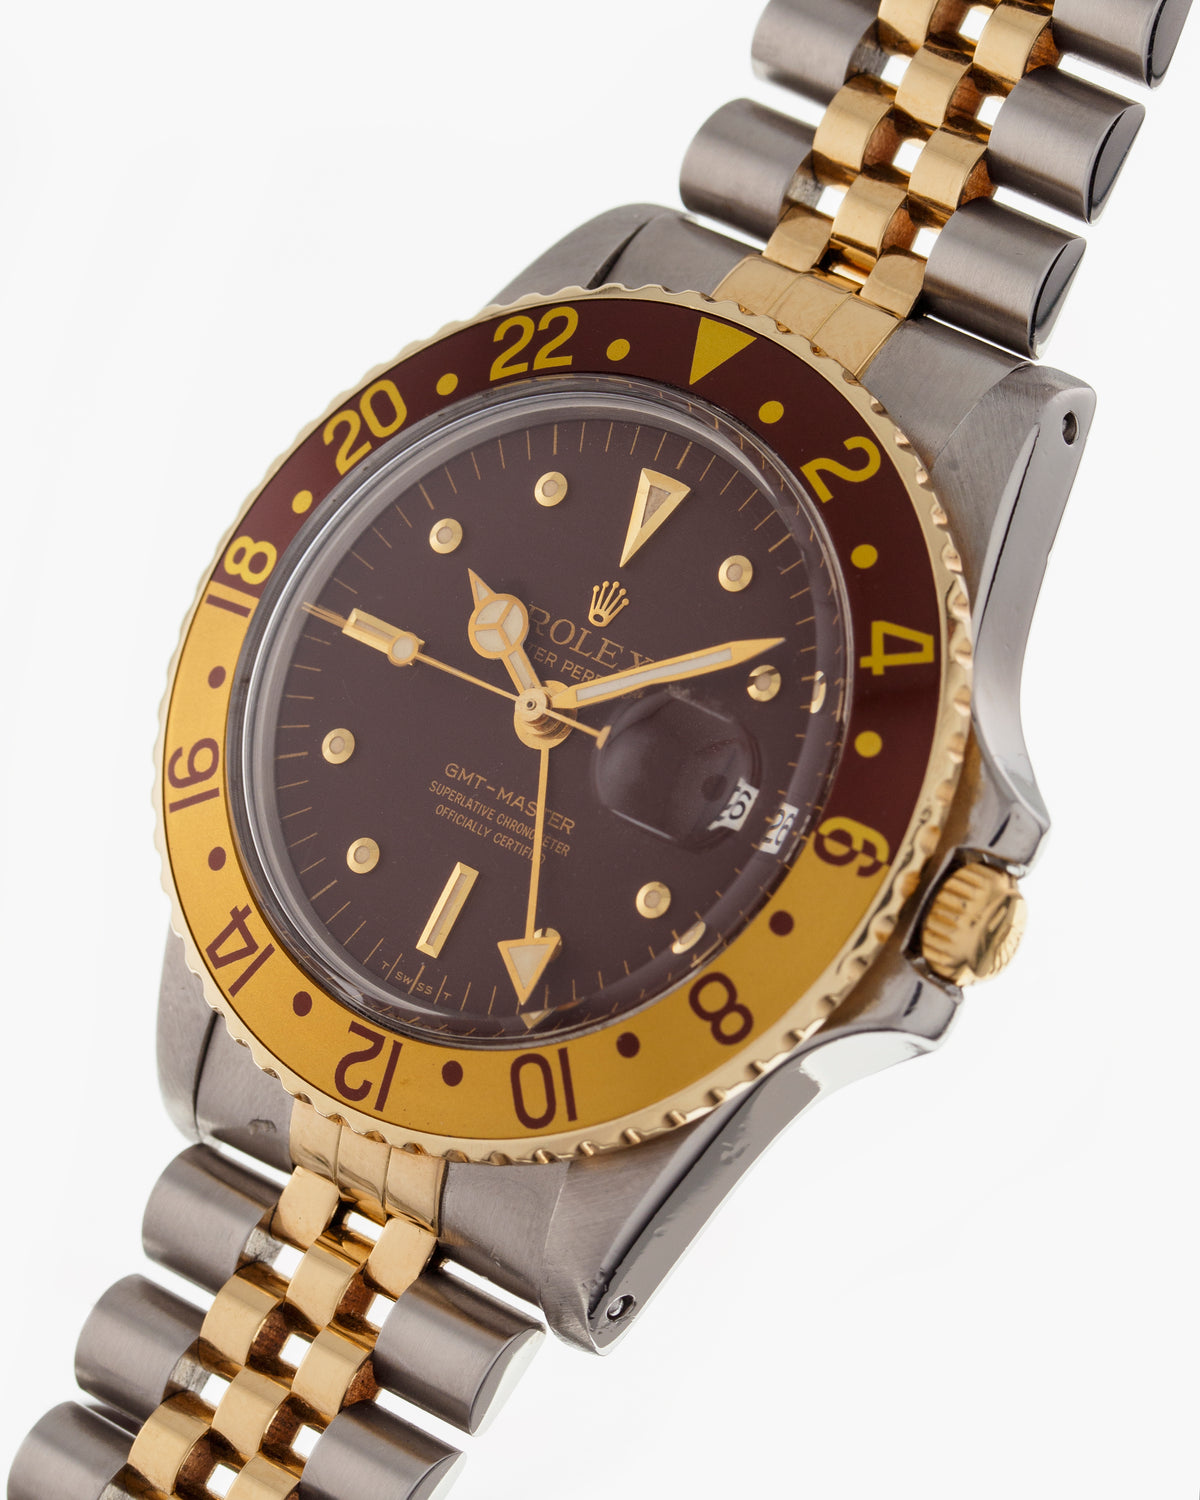 Rolex Oyster Perpetual GMT Master “Tiger Eye”